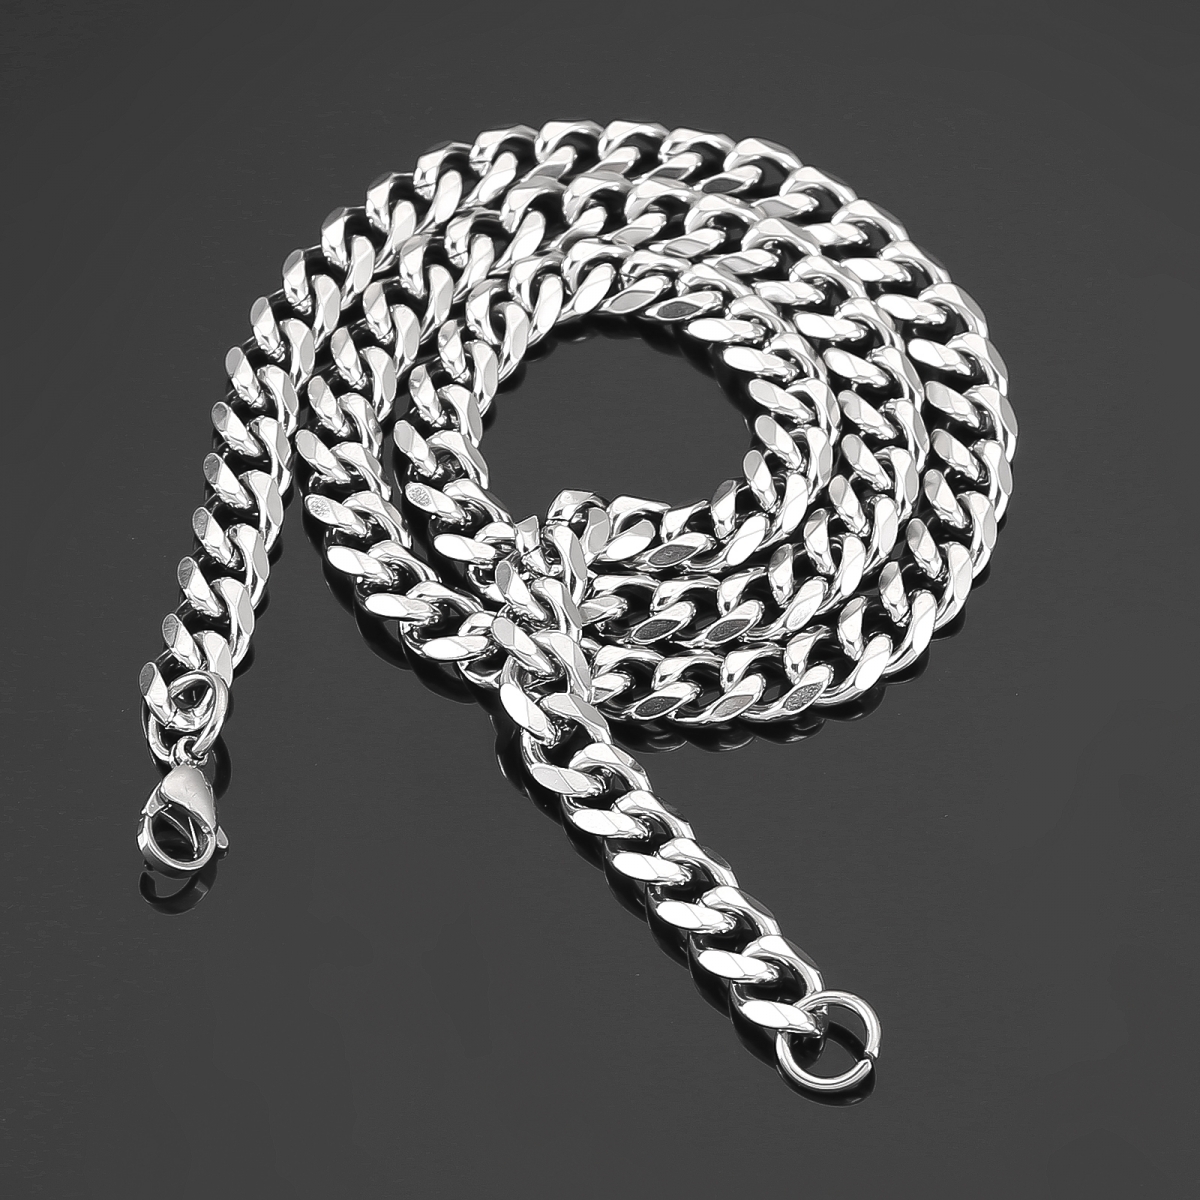 King Chain Necklace US$1.6/PC-NORSECOLLECTION- Viking Jewelry,Viking Necklace,Viking Bracelet,Viking Rings,Viking Mugs,Viking Accessories,Viking Crafts